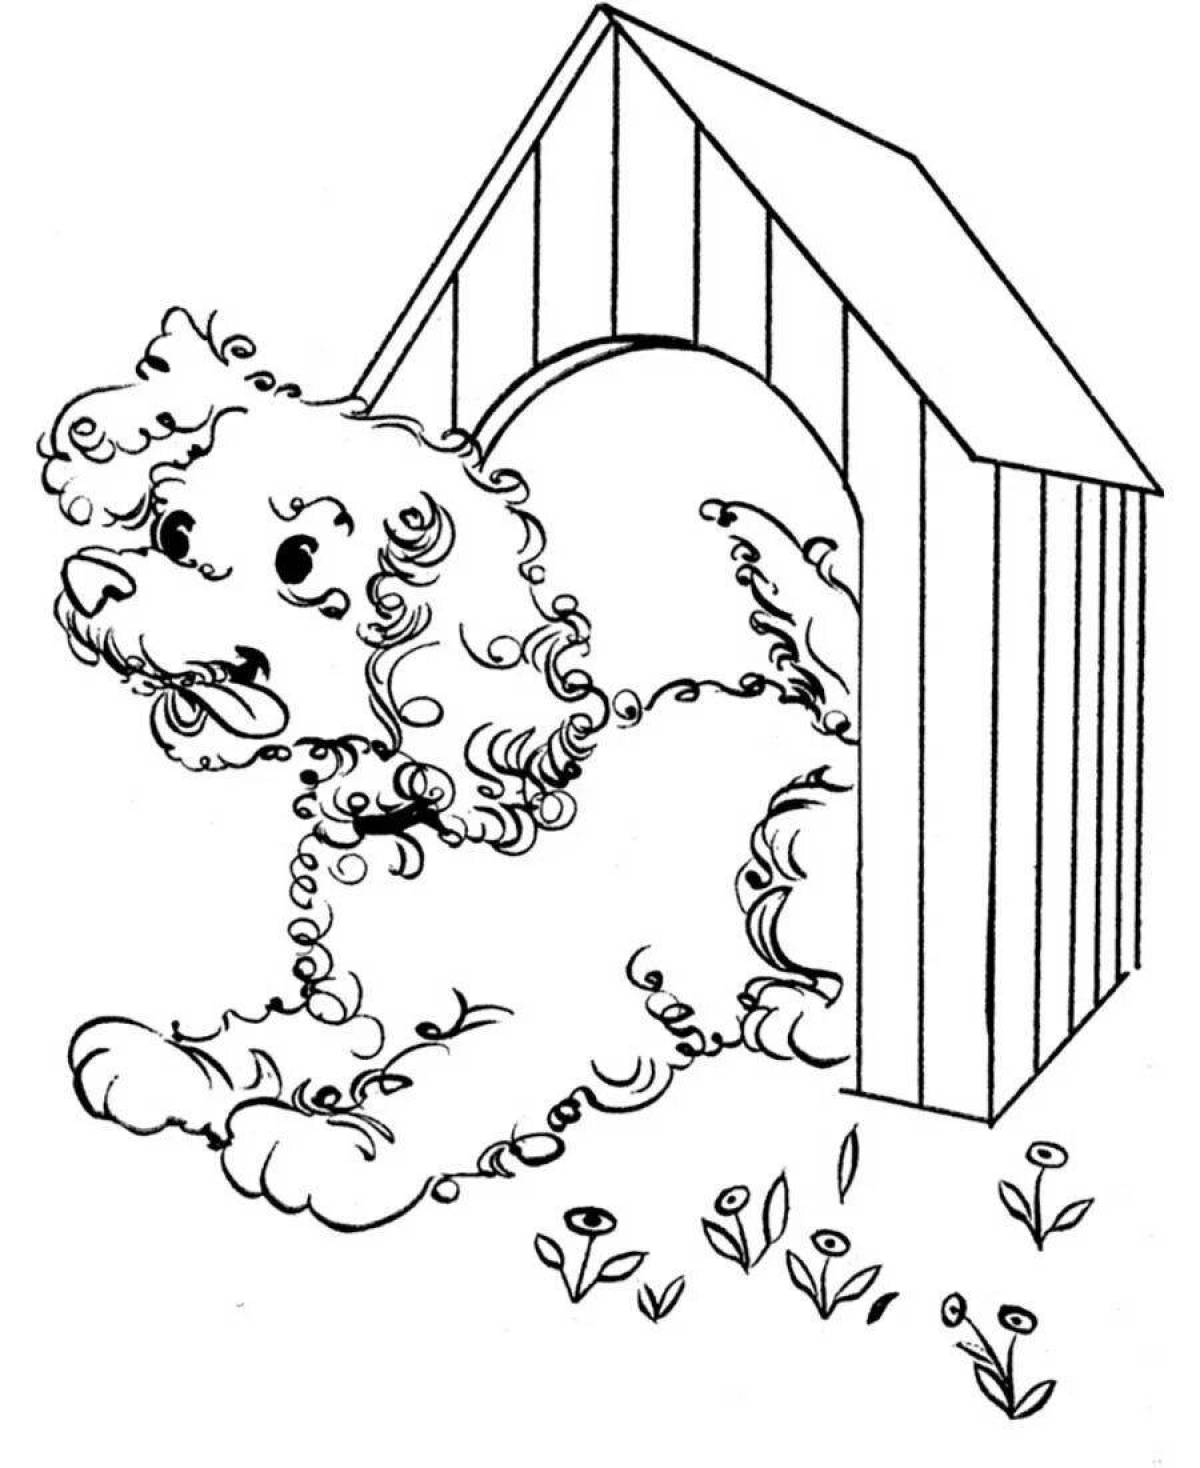 Coloring book shining dog house